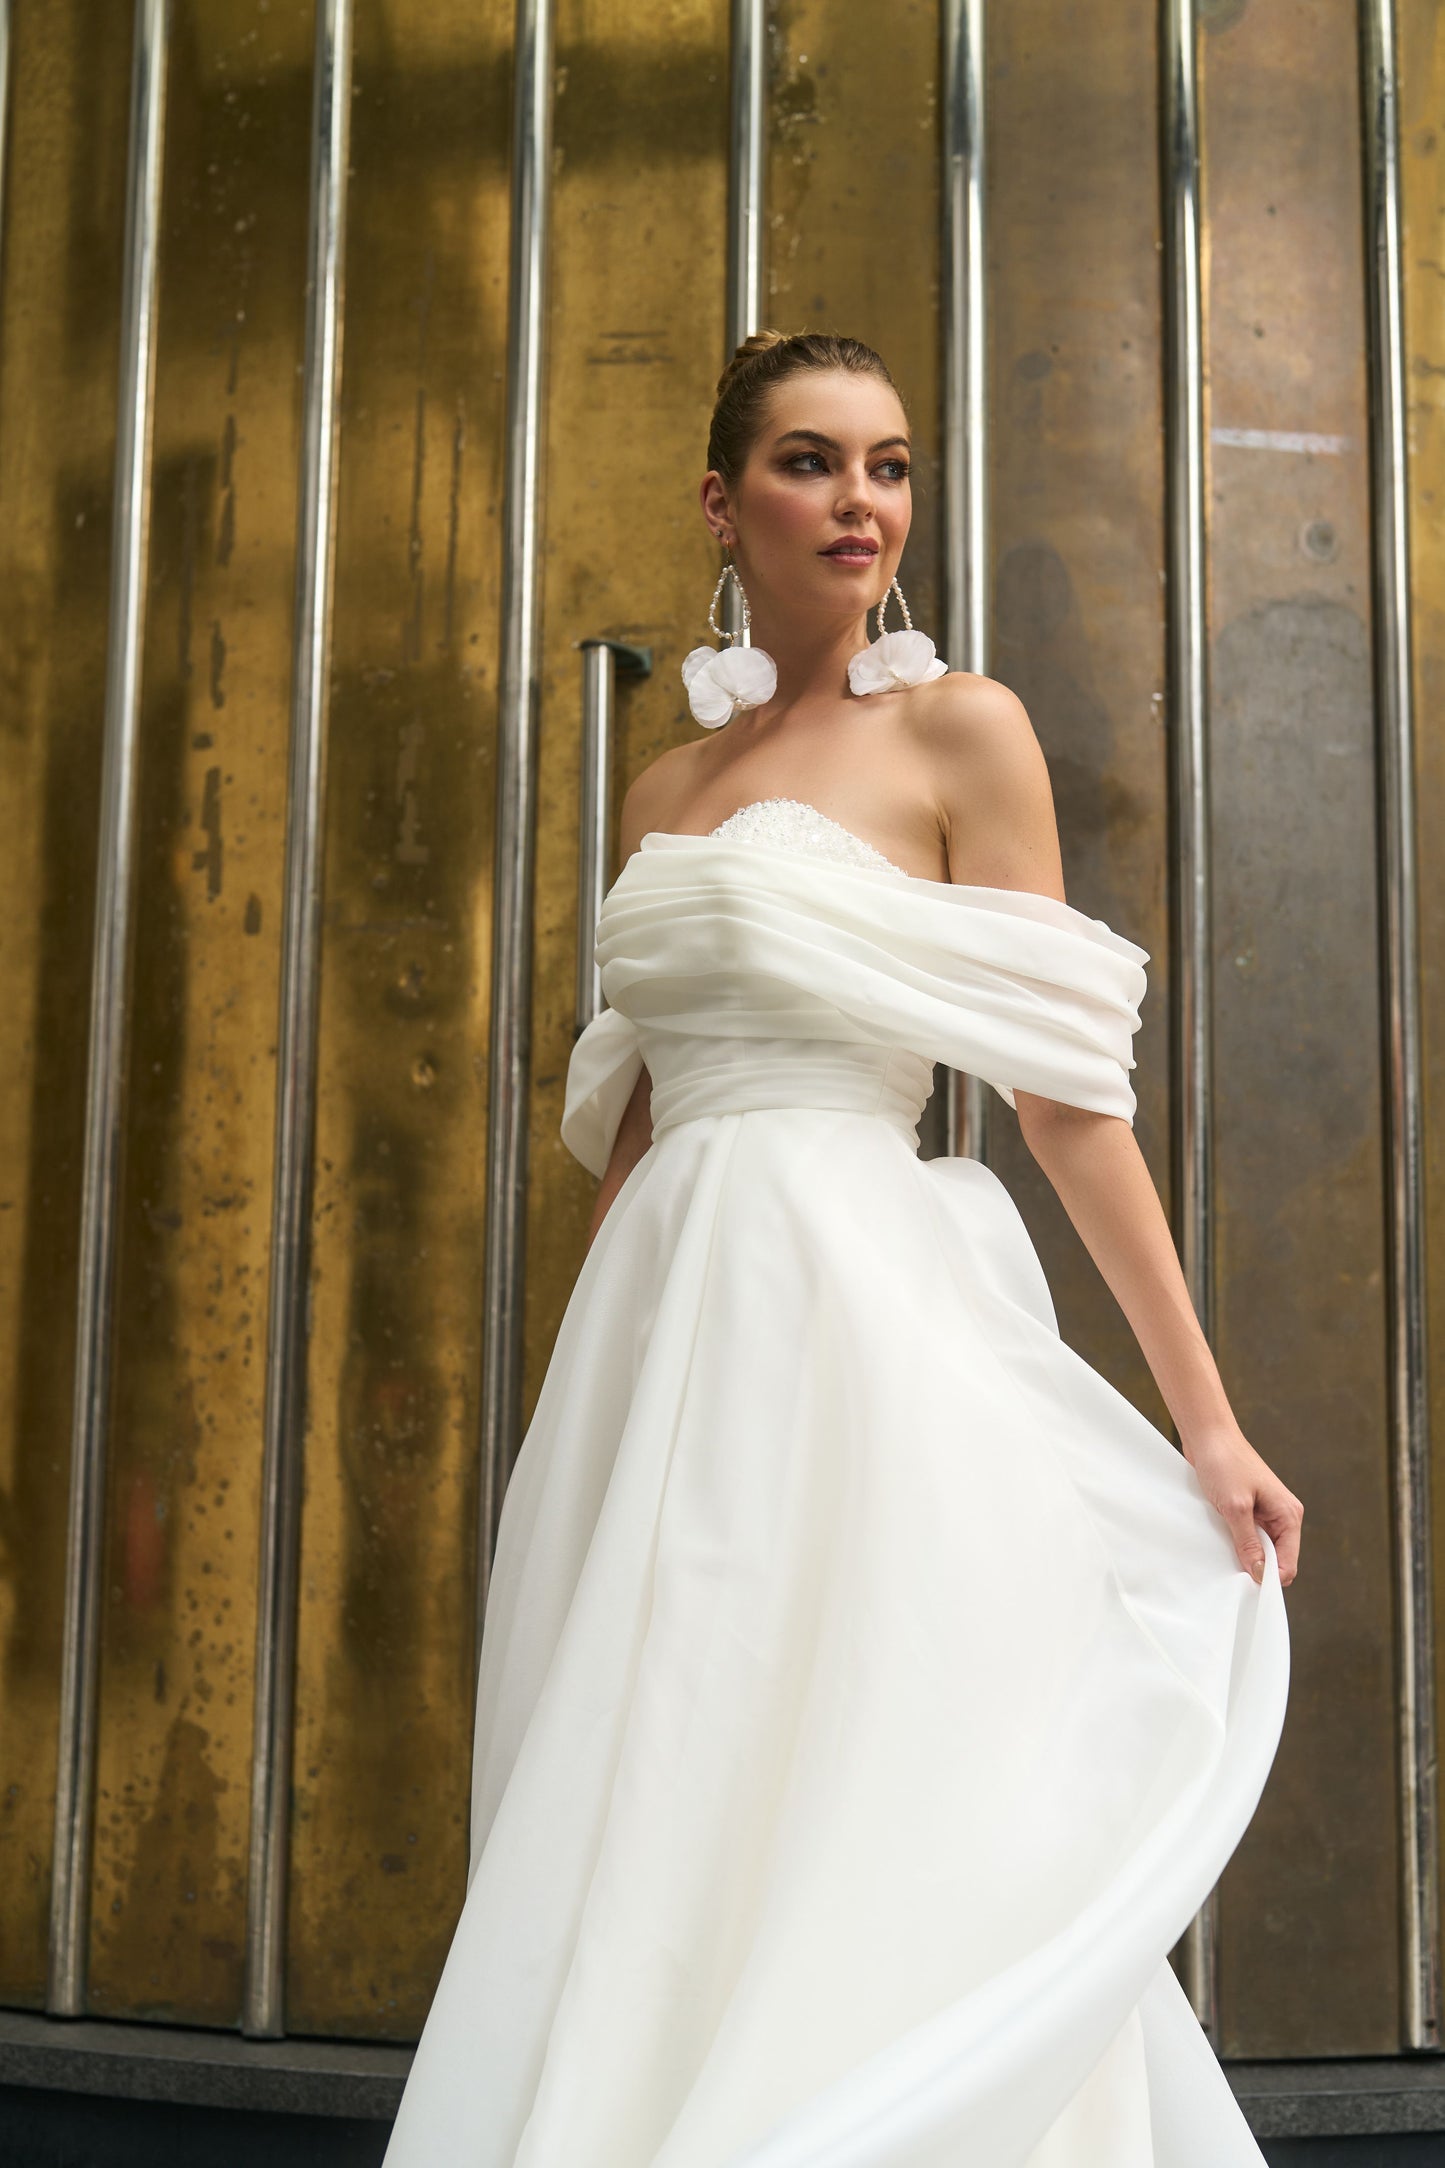 Rhianna wedding dress in sheer Organza fabric with off-the-shoulder pleated band and A-line silhouette. Wide waistband and light skirt with chapel train. High split adds a modern touch and ease of movement for walking and dancing all day.